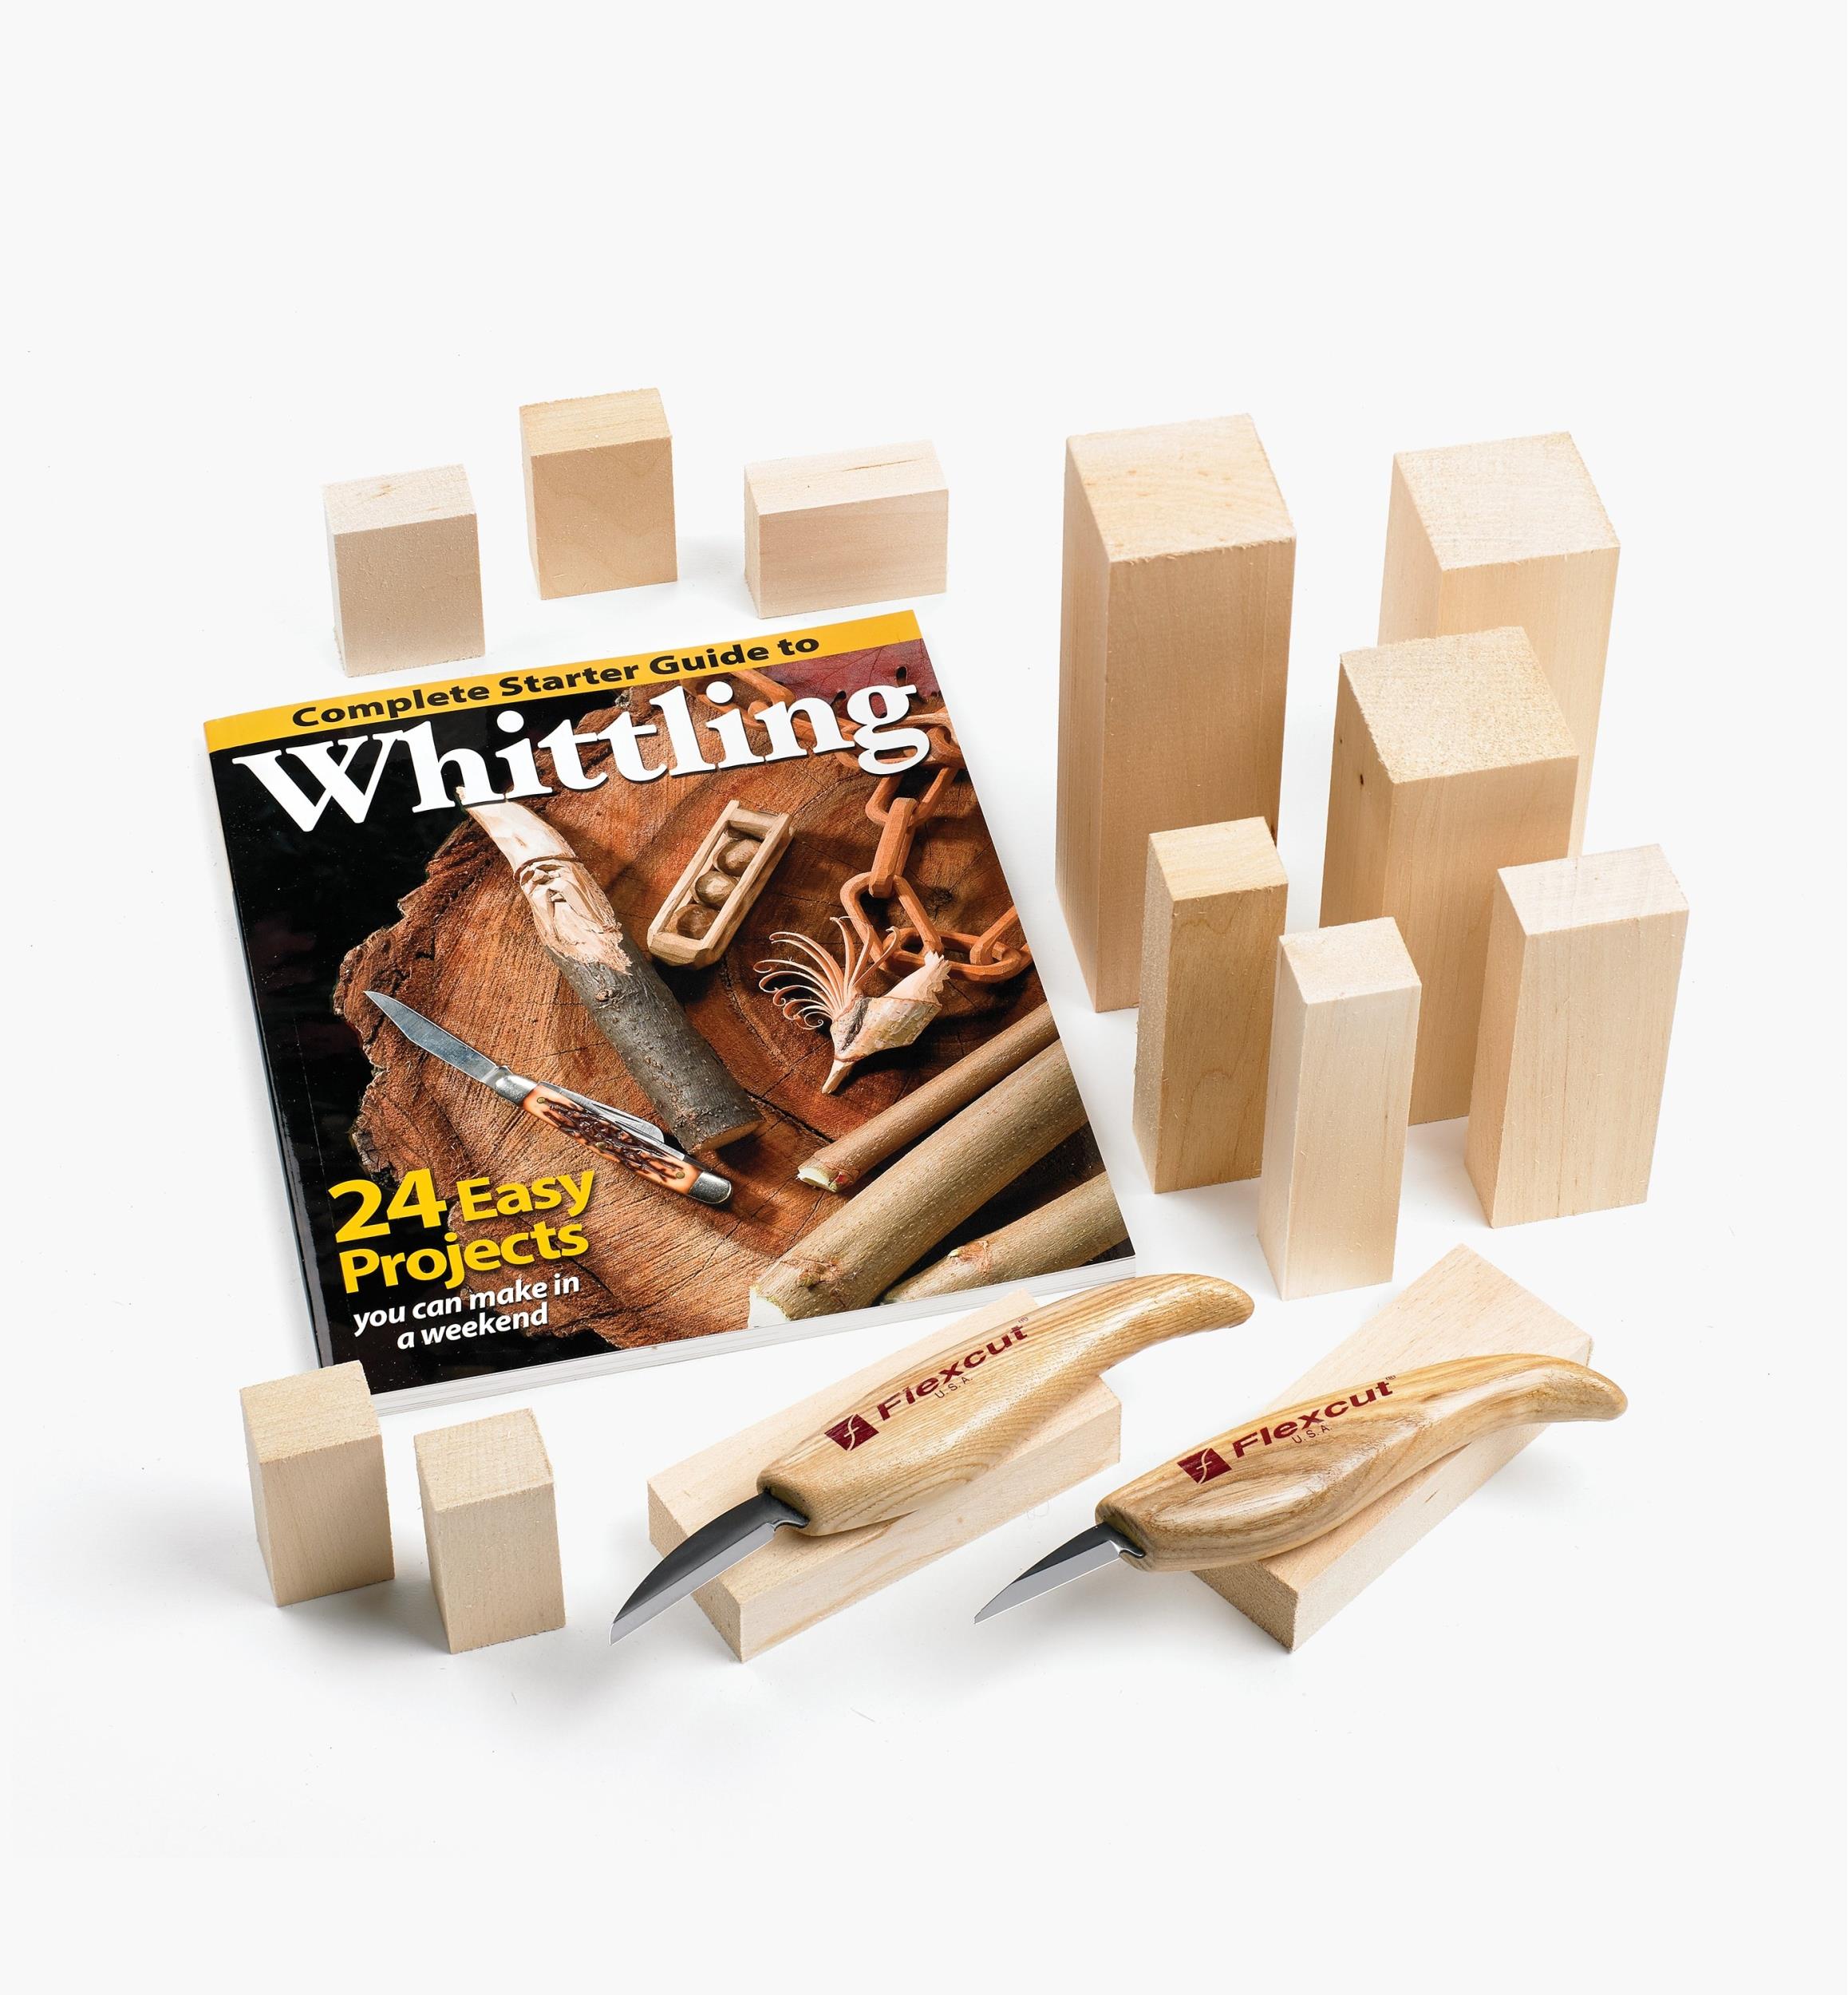 Whittling for Beginners: A Comprehensive Beginner's Guide to Learn